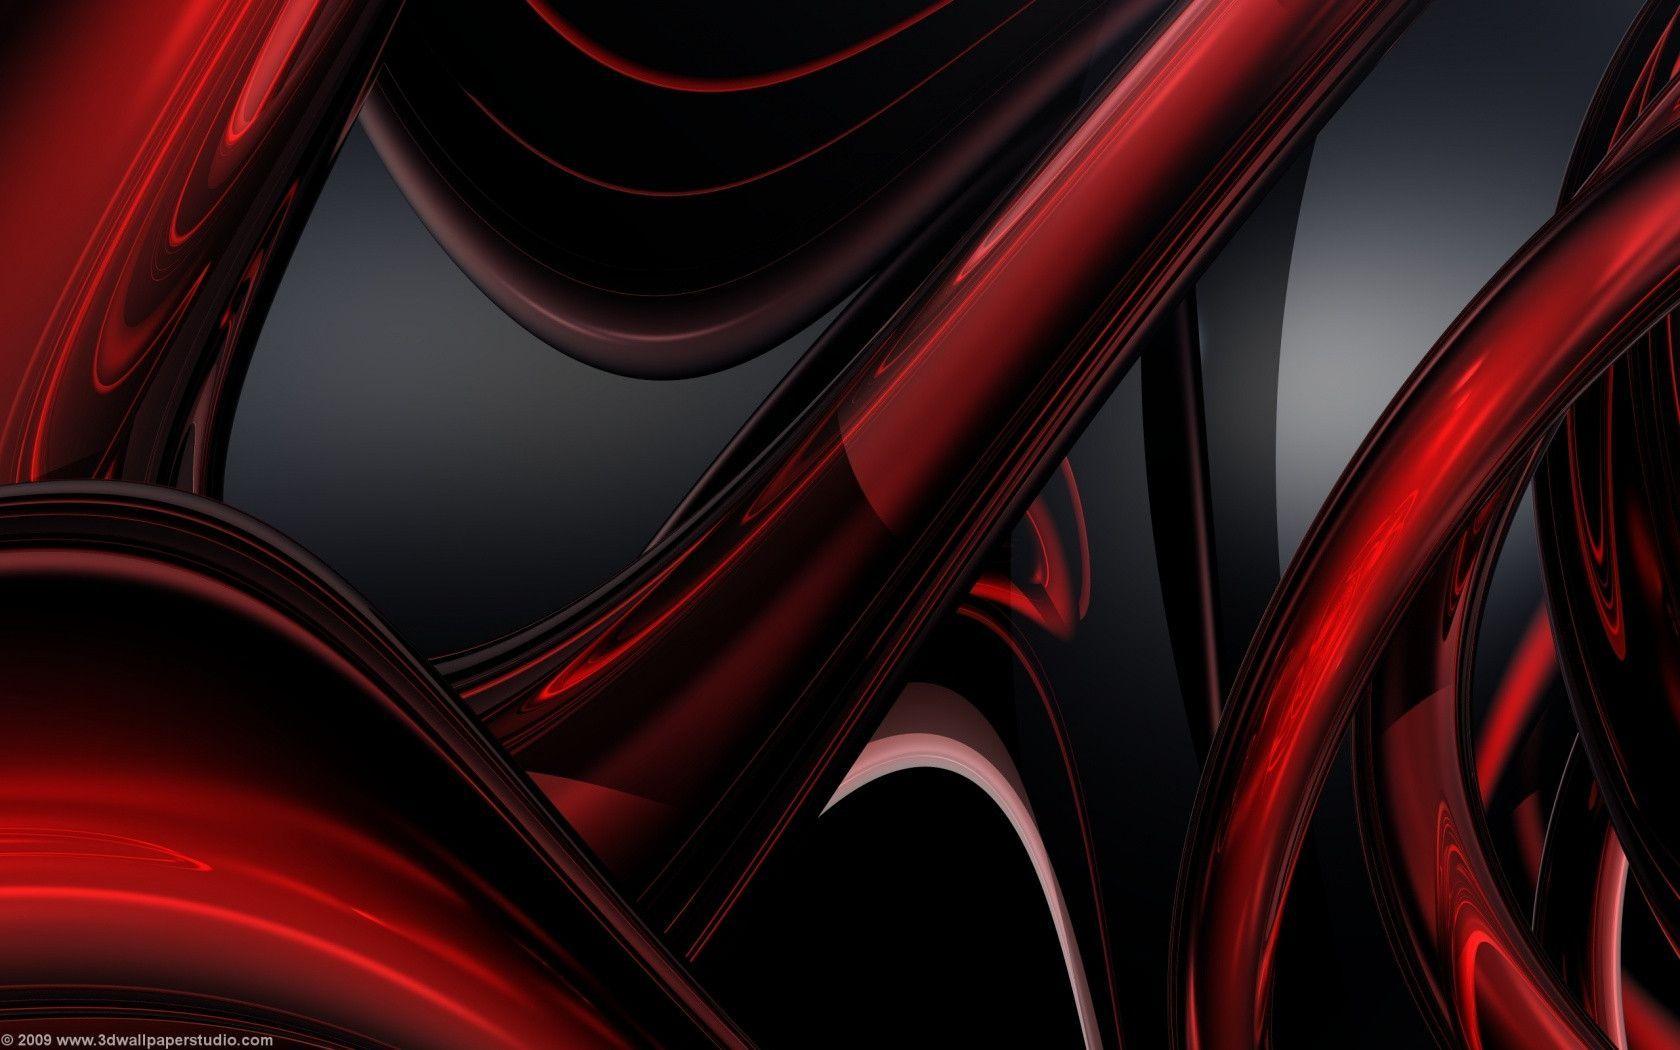 Black And Red Abstract Wallpapers - Wallpaper Cave